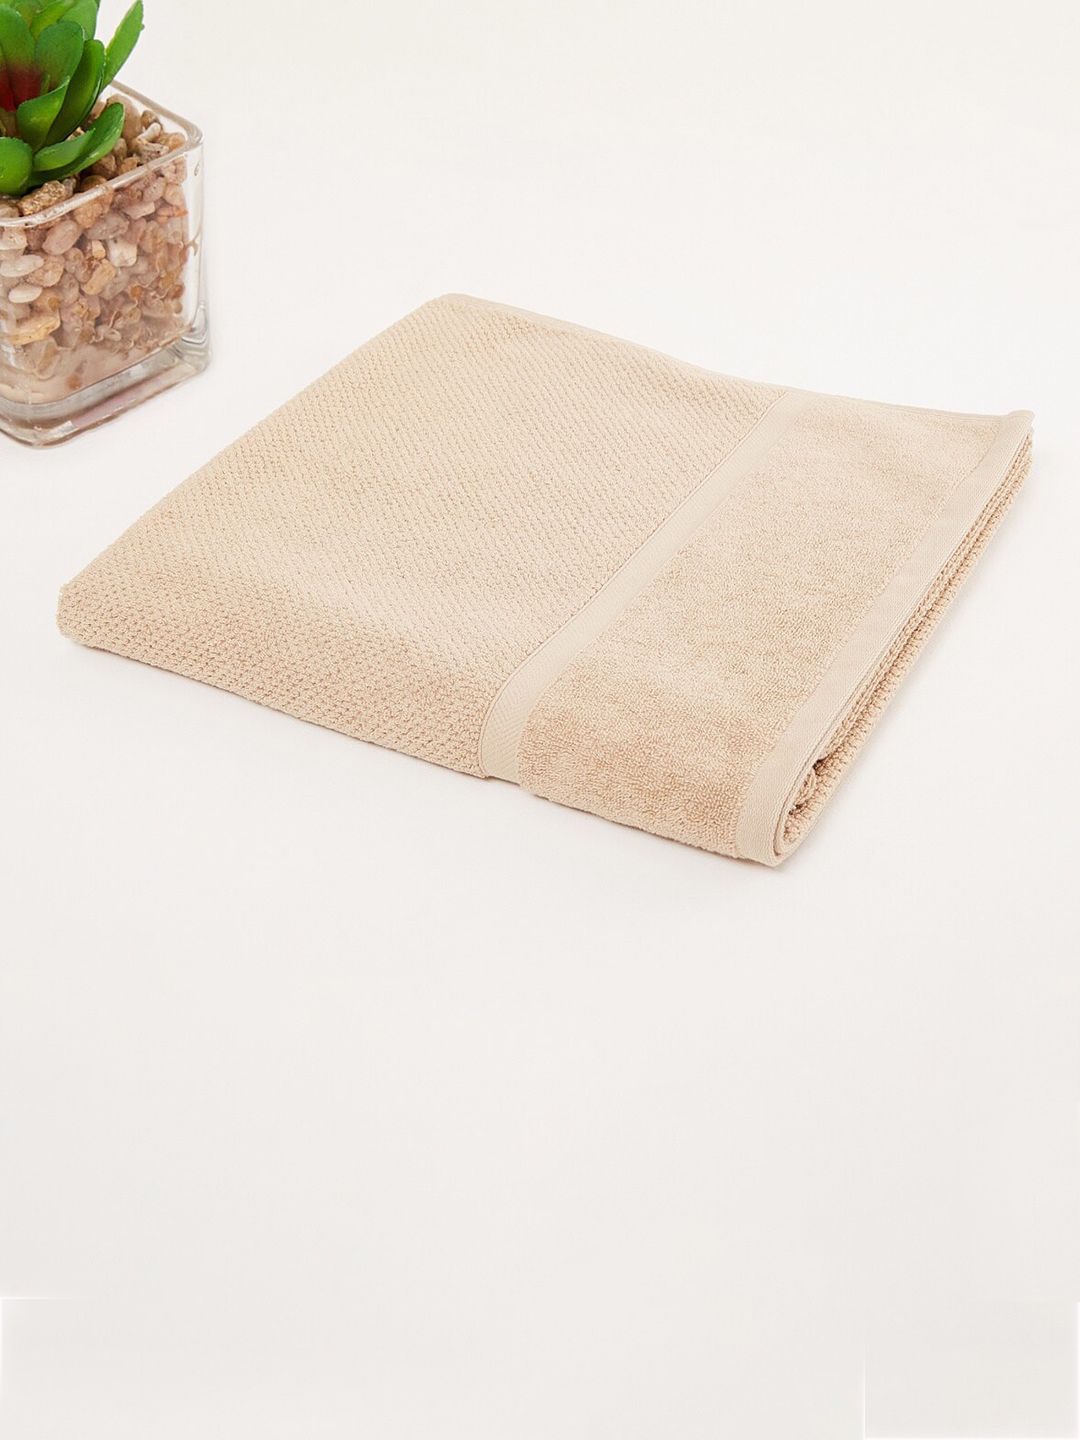 Home Centre Beige Solid 380 GSM Cotton Bath Towel Price in India